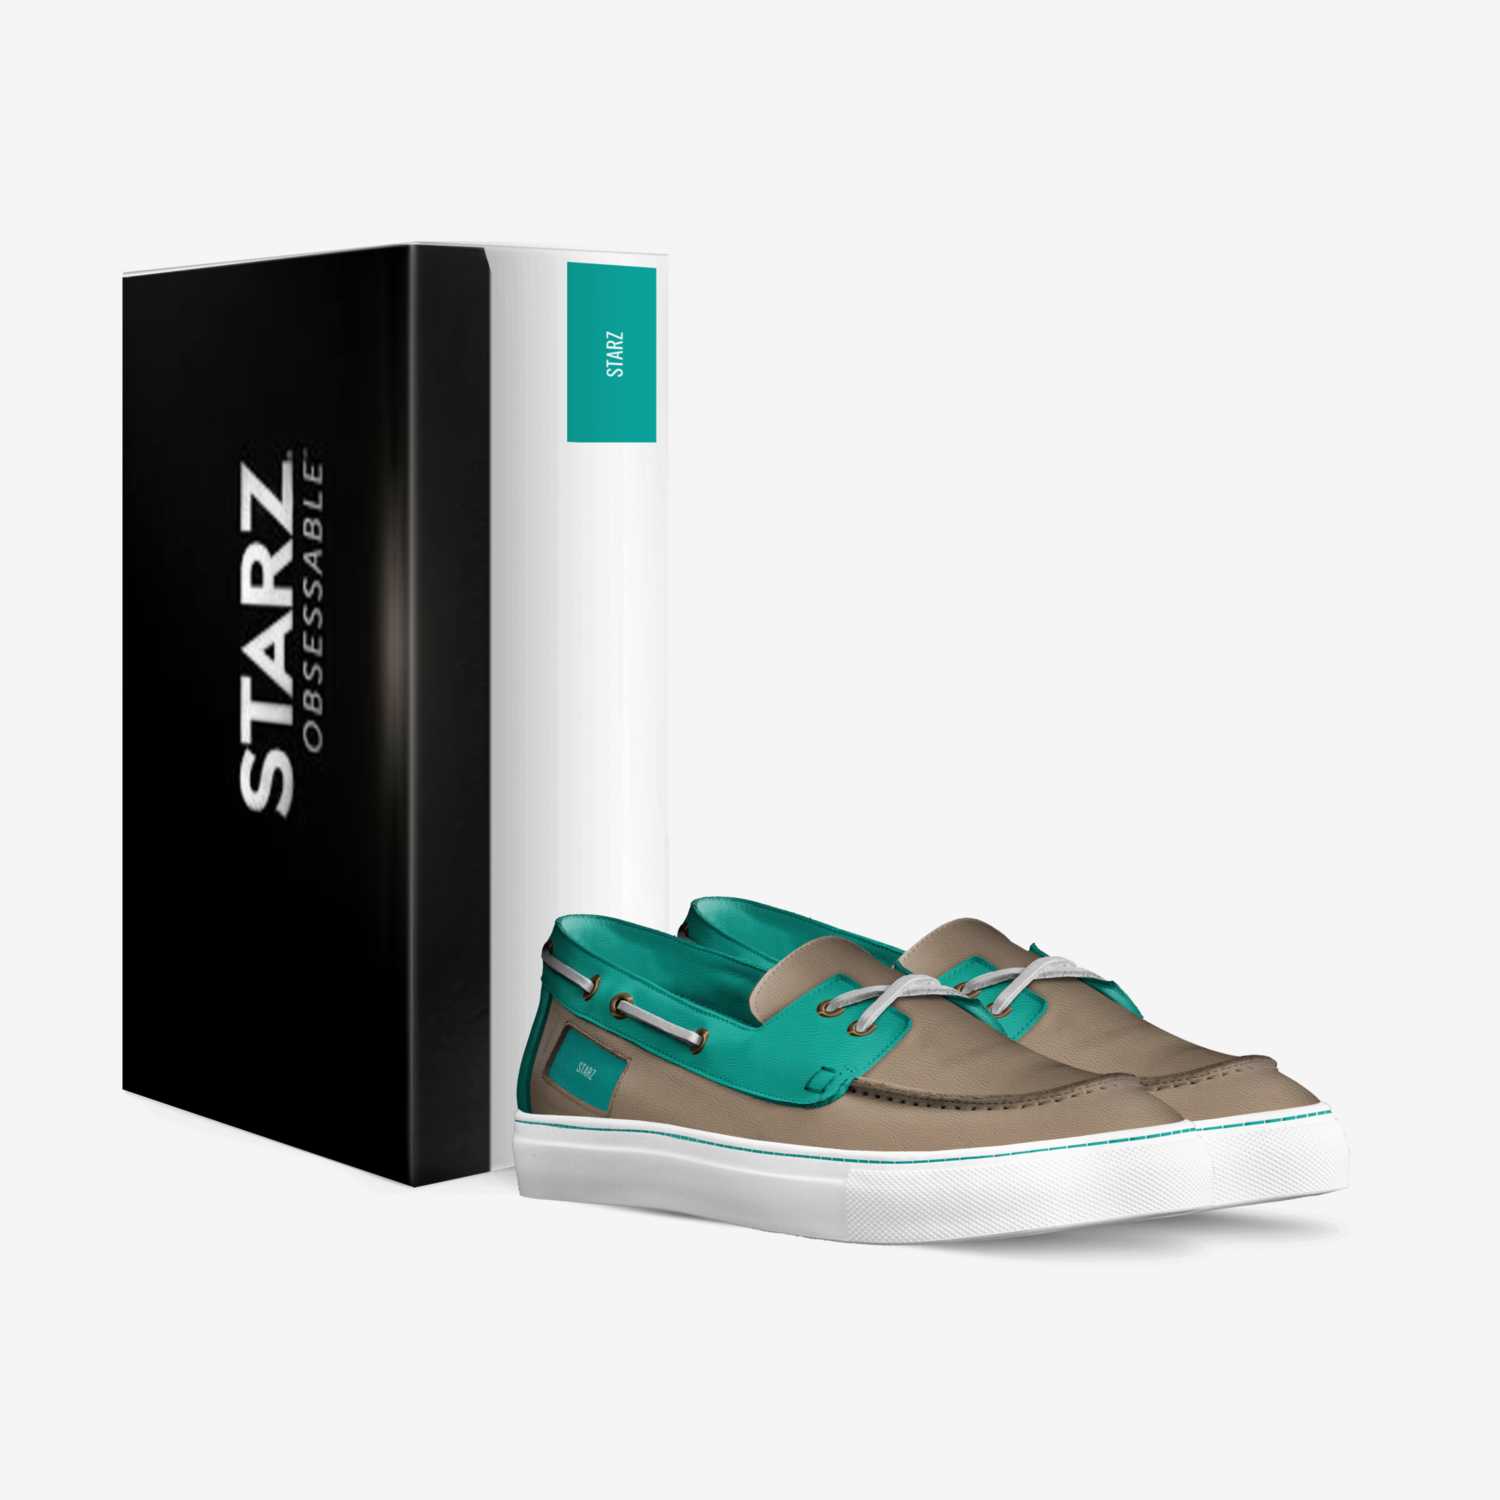 starz custom made in Italy shoes by Emily | Box view